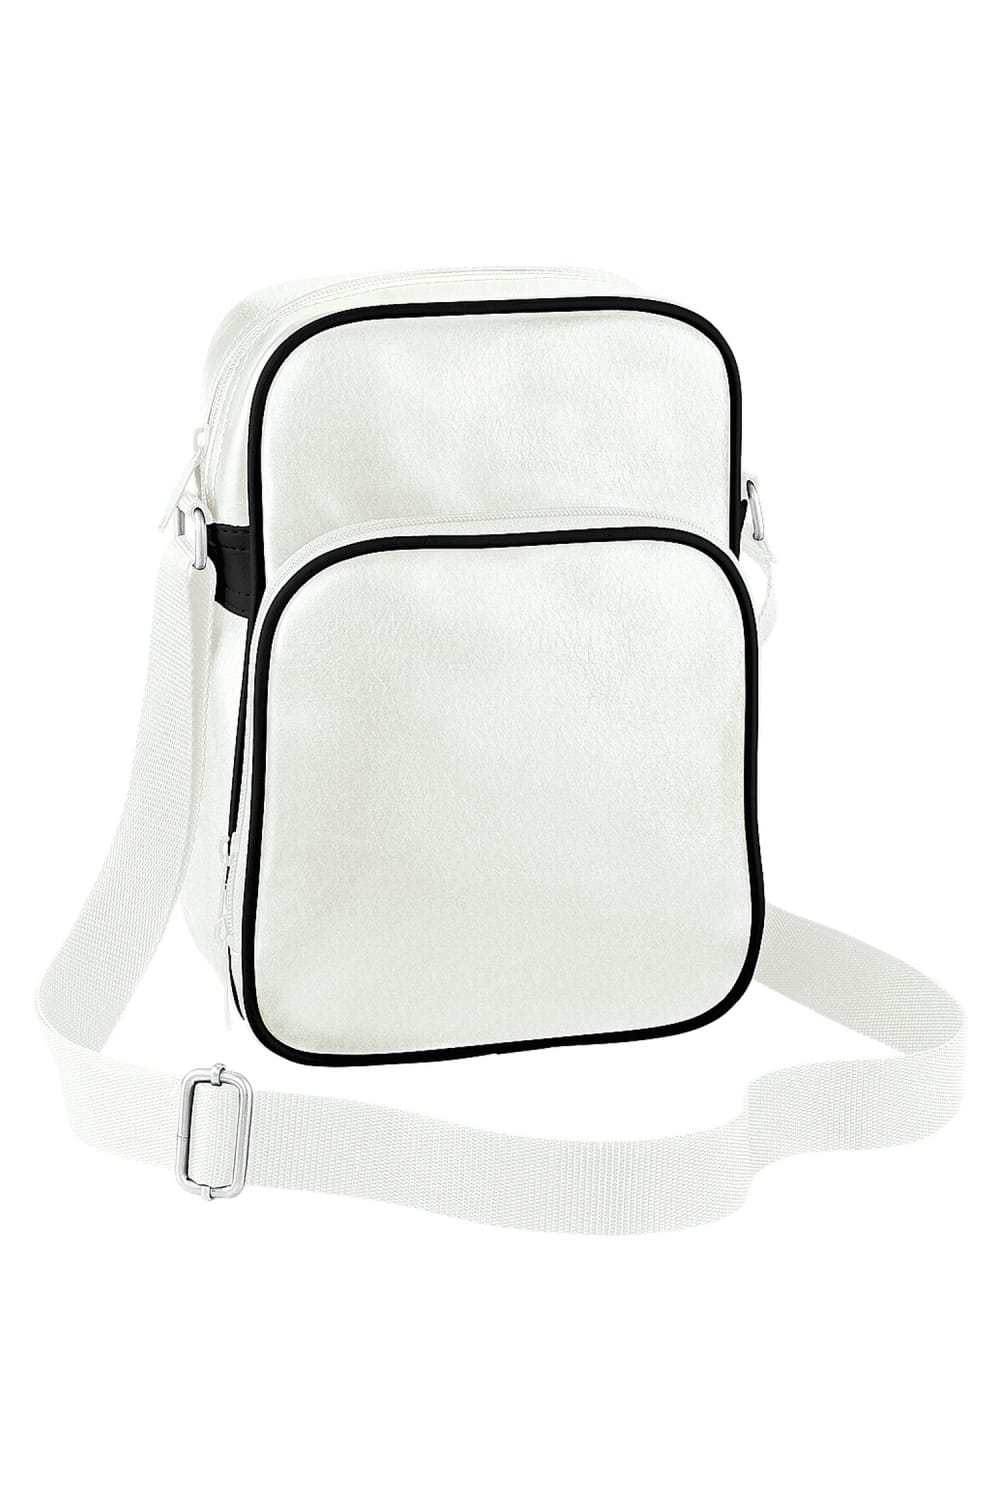 Bagbase Original Airline Reporter Bag (1 Gallon) (Pack of 2) (Off White/ Black) (One Size)